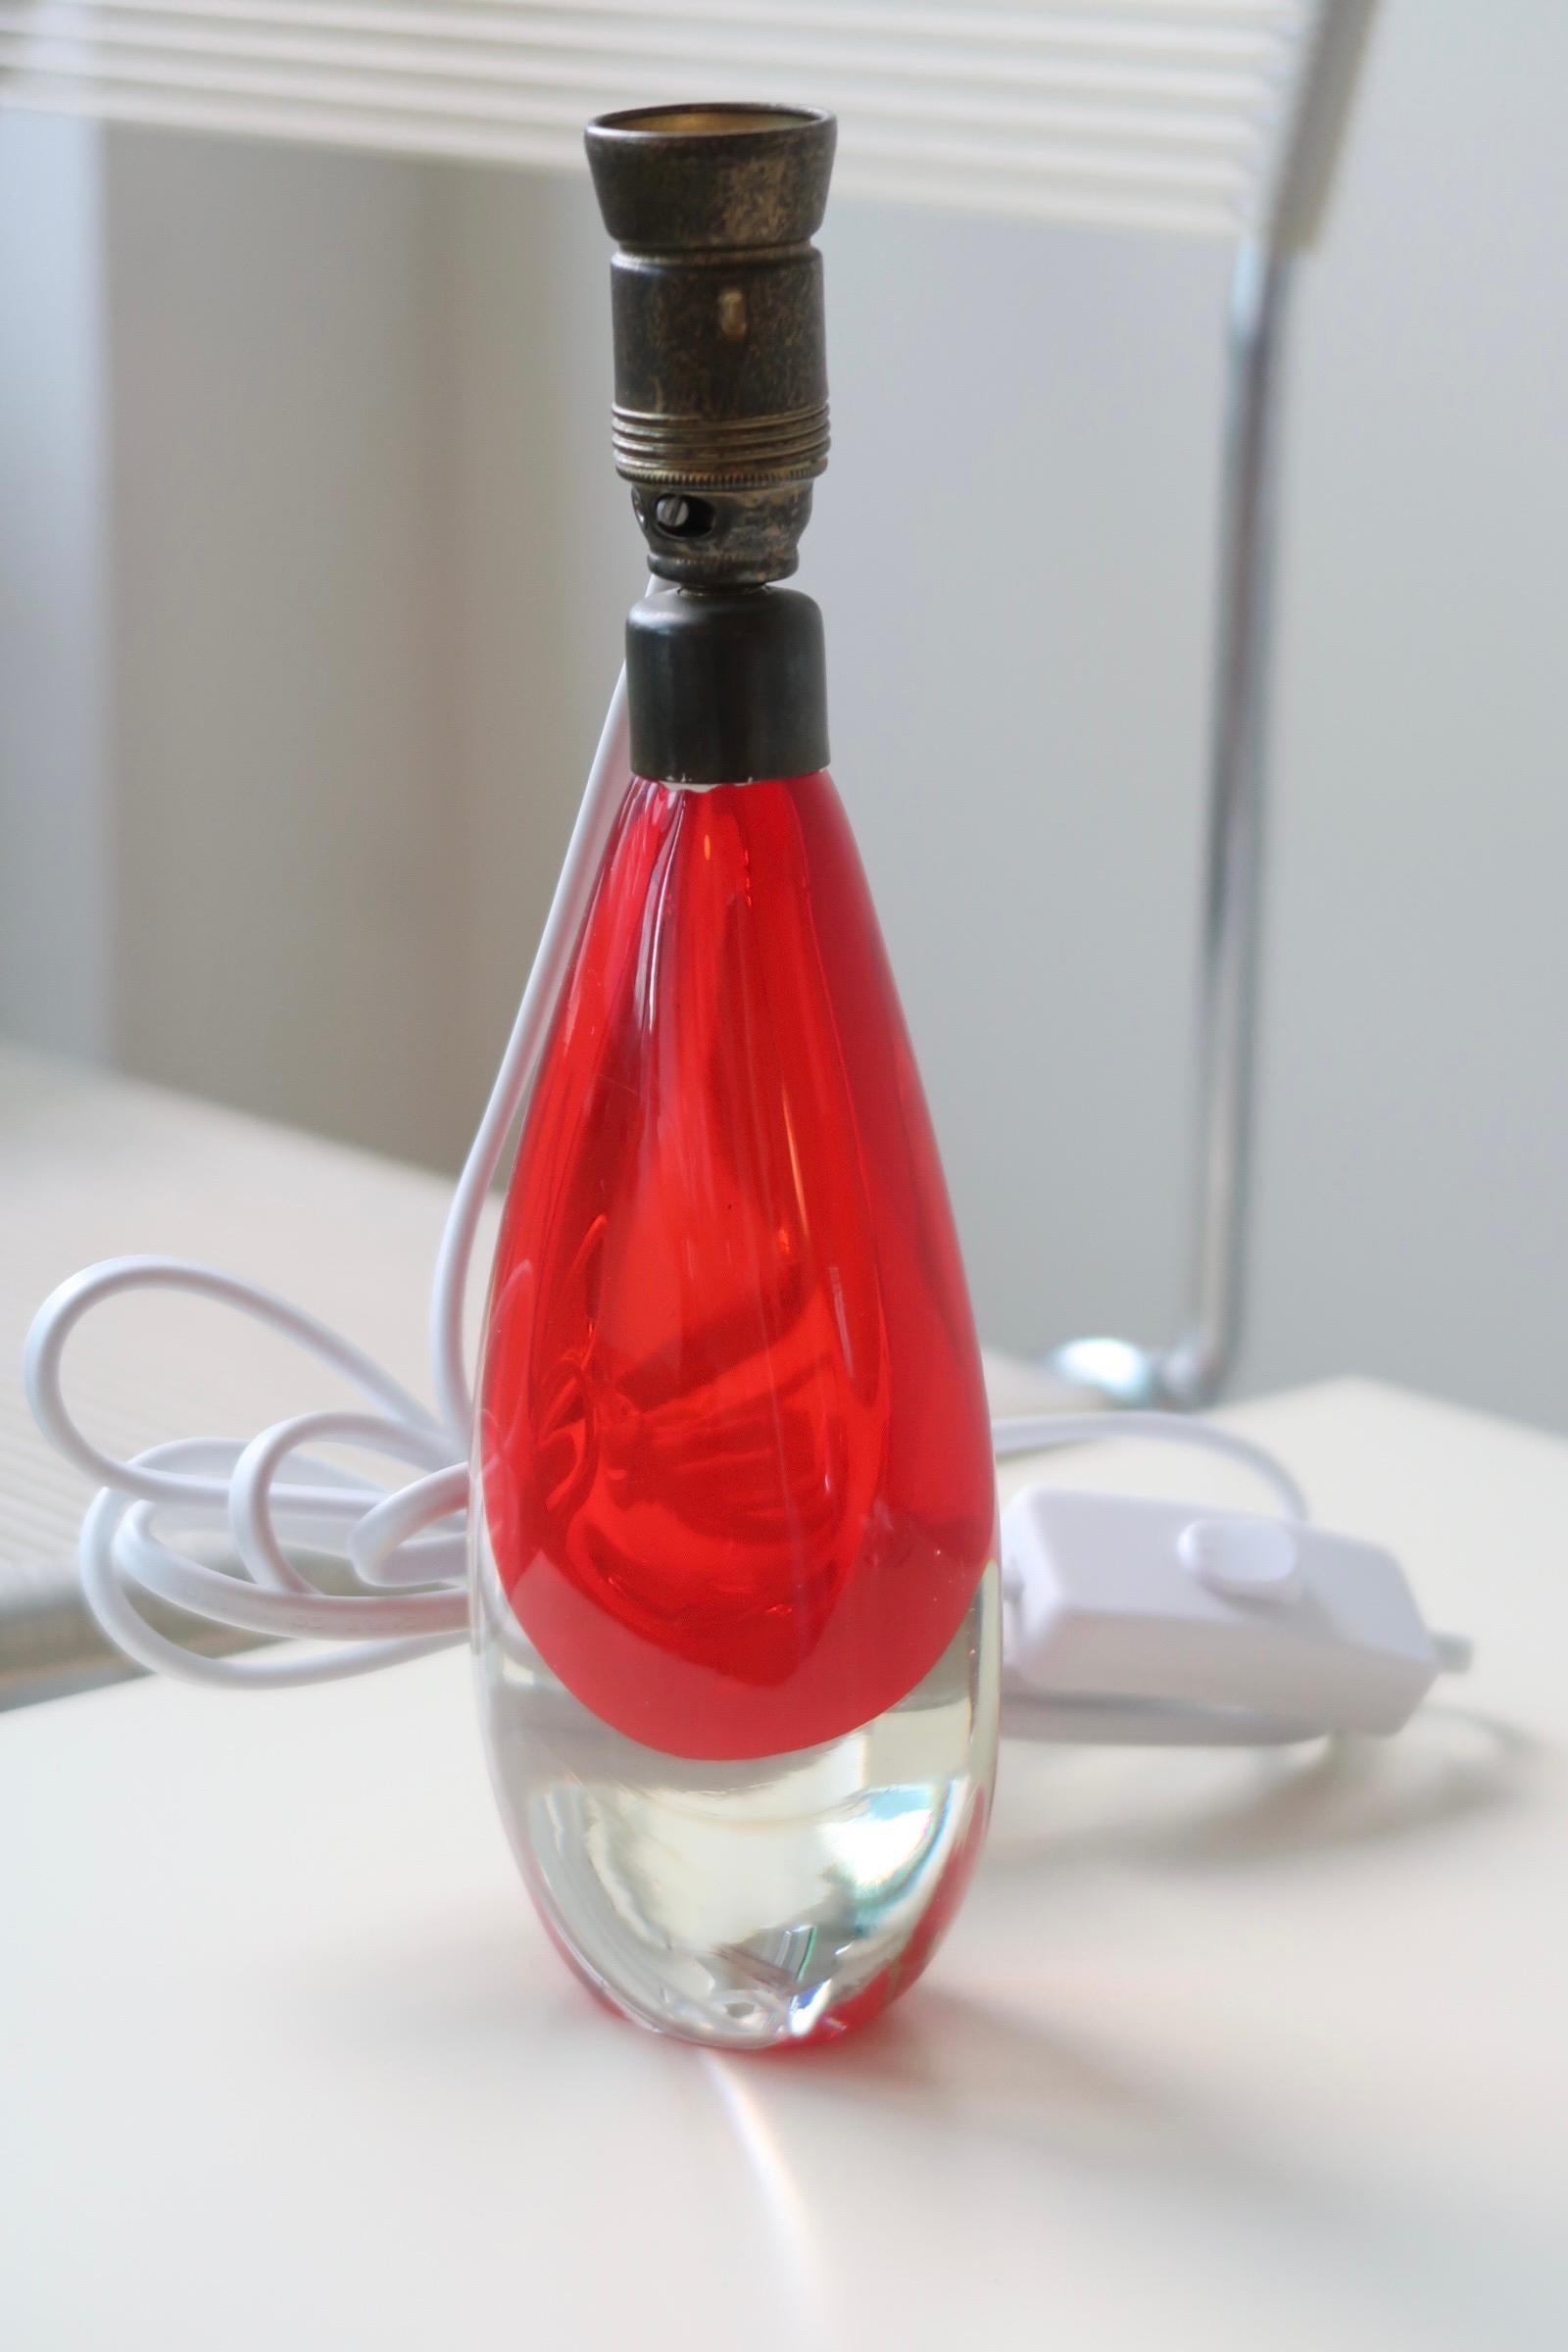 Beautiful vintage Murano Sommerso lamp base in red and transparent glass. The perfect Size for a bedside table or a windowsill. Made in Sommerso technique. Handmade in Italy, 1970s, and comes with new white cord.

H:22.5 cm W:7.5 cm D:5 cm.